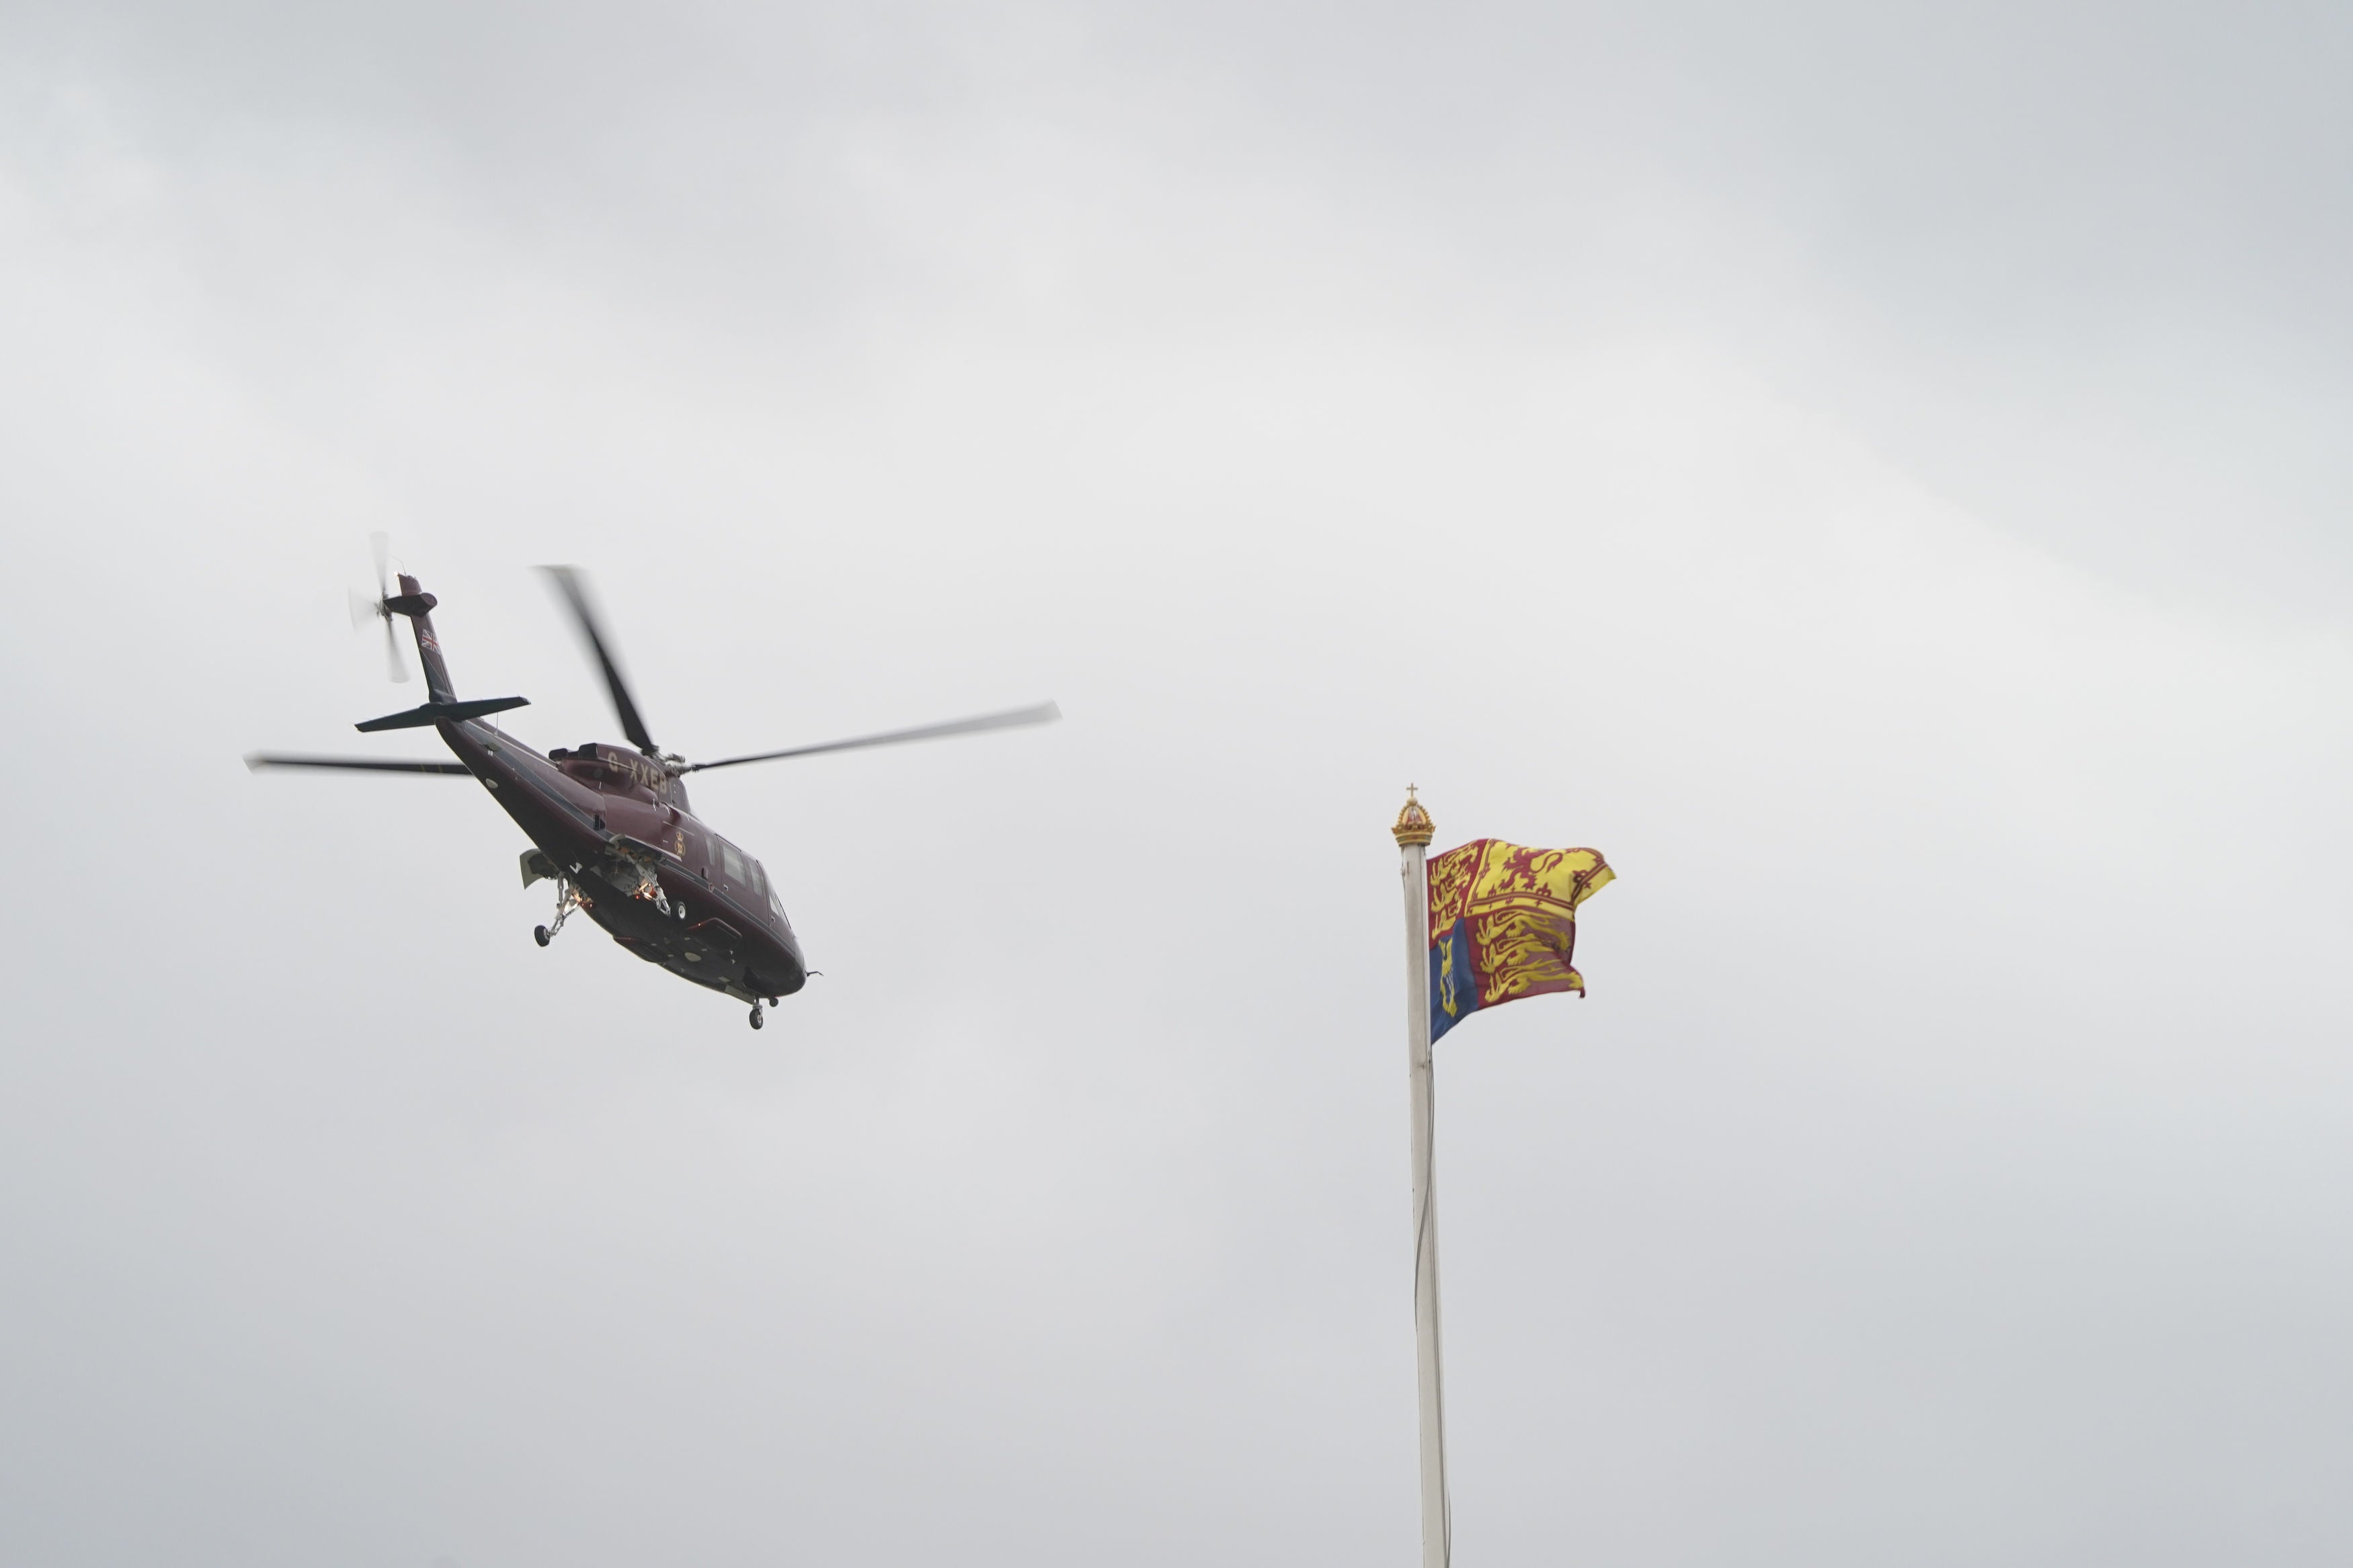 A helicopter was seen leaving Buckingham Palace for the royal family’s Sandringham estate in Norfolk